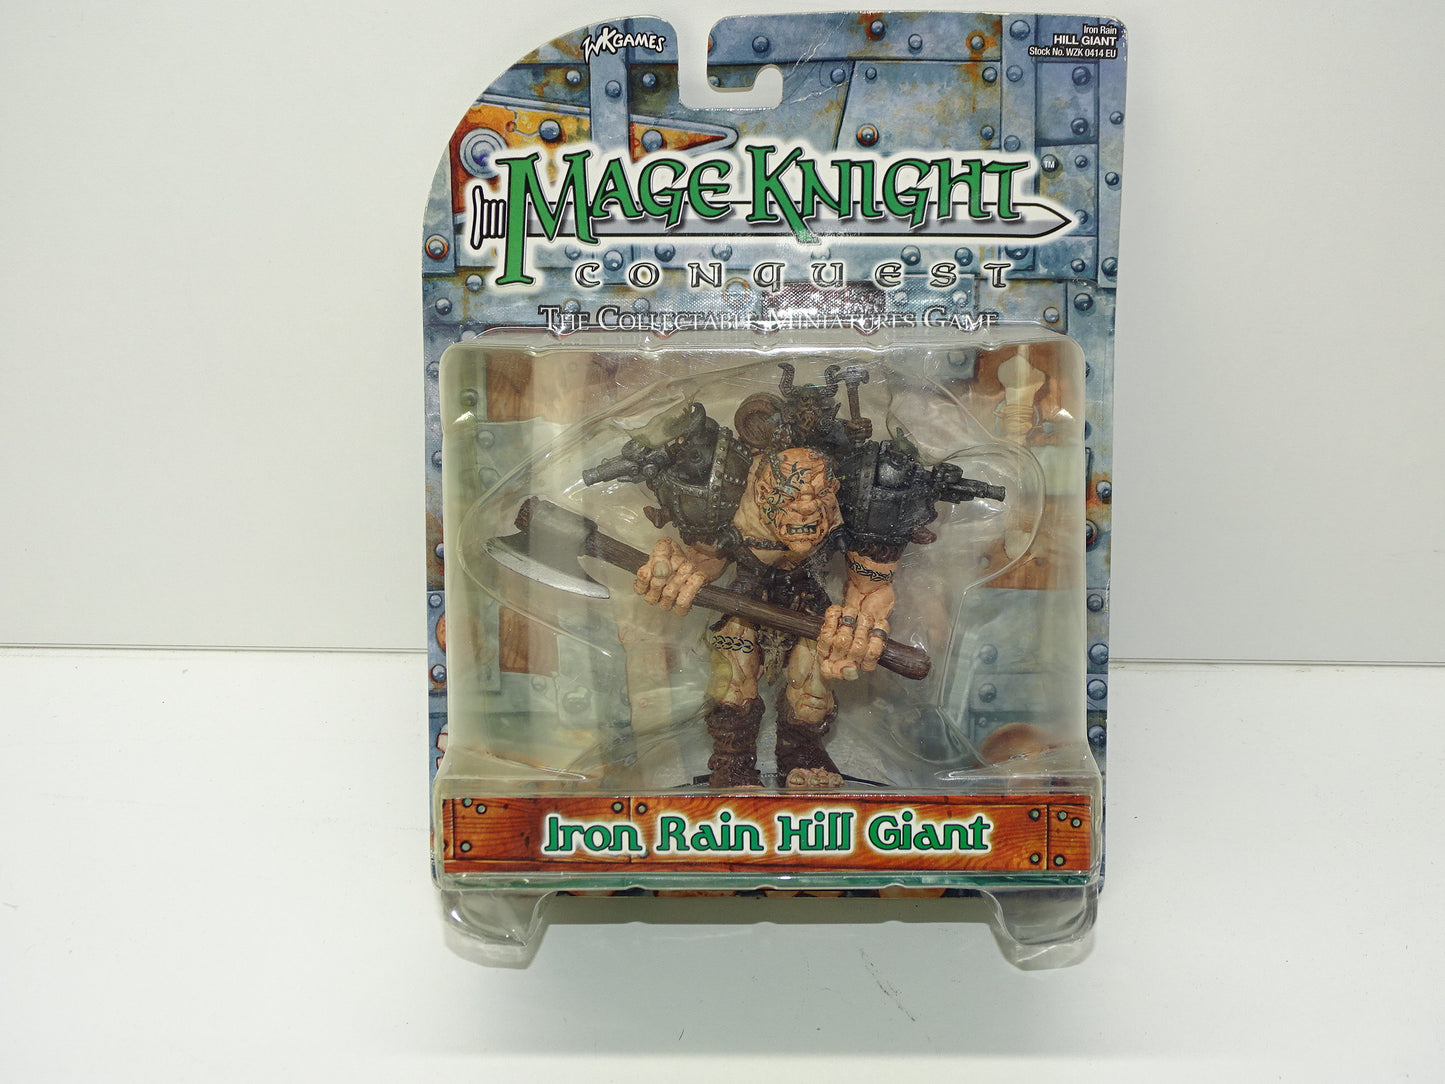 Actiefiguur: Mage Knight Conquest, Iron Rain Hill Giant, 2002